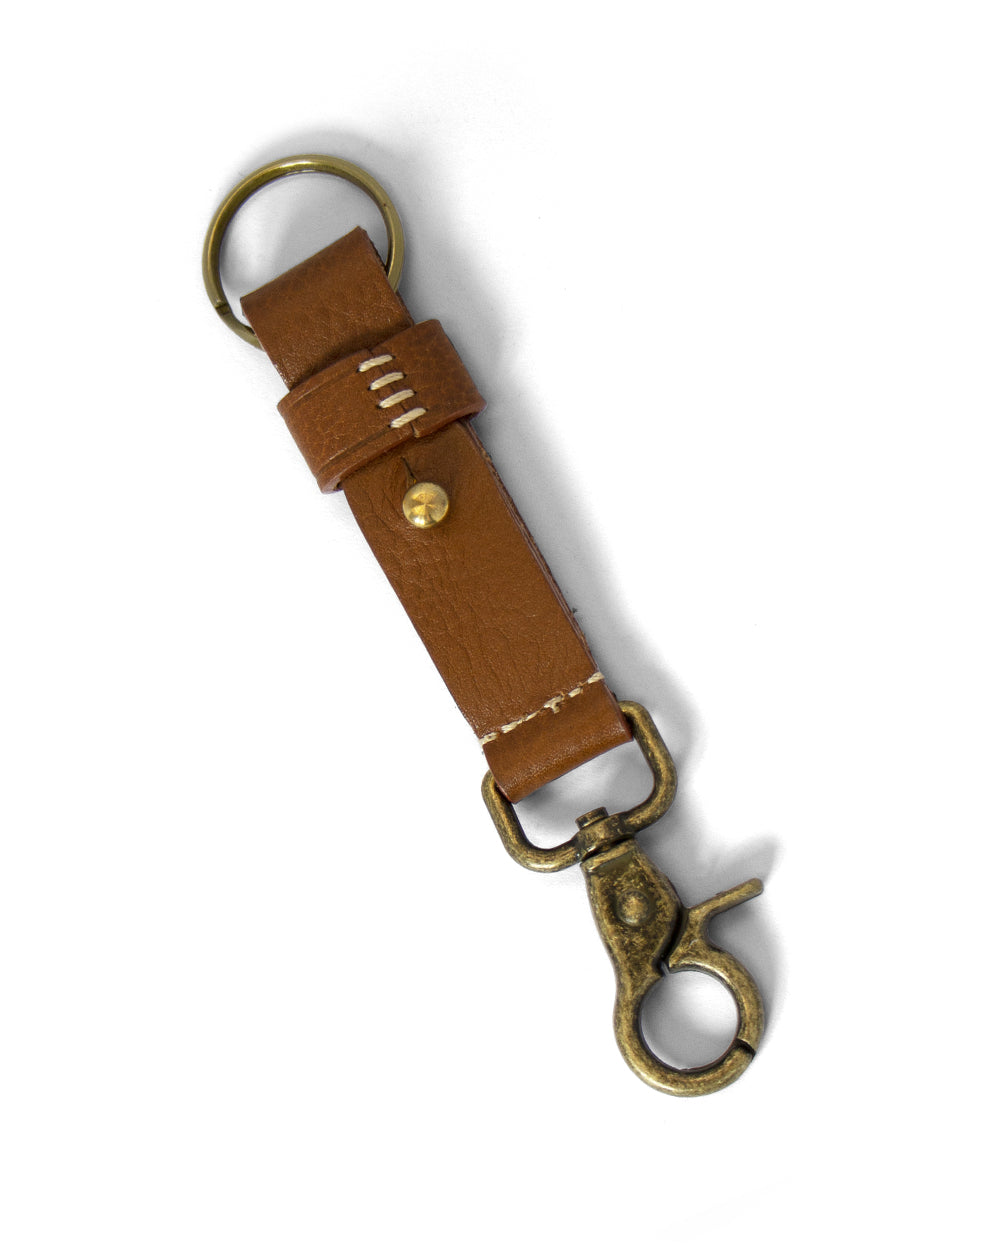 Speight's Keyring -  Beer Gear Apparel & Merchandise - Speights - Lion Red - VB - Tokyo Dy merch